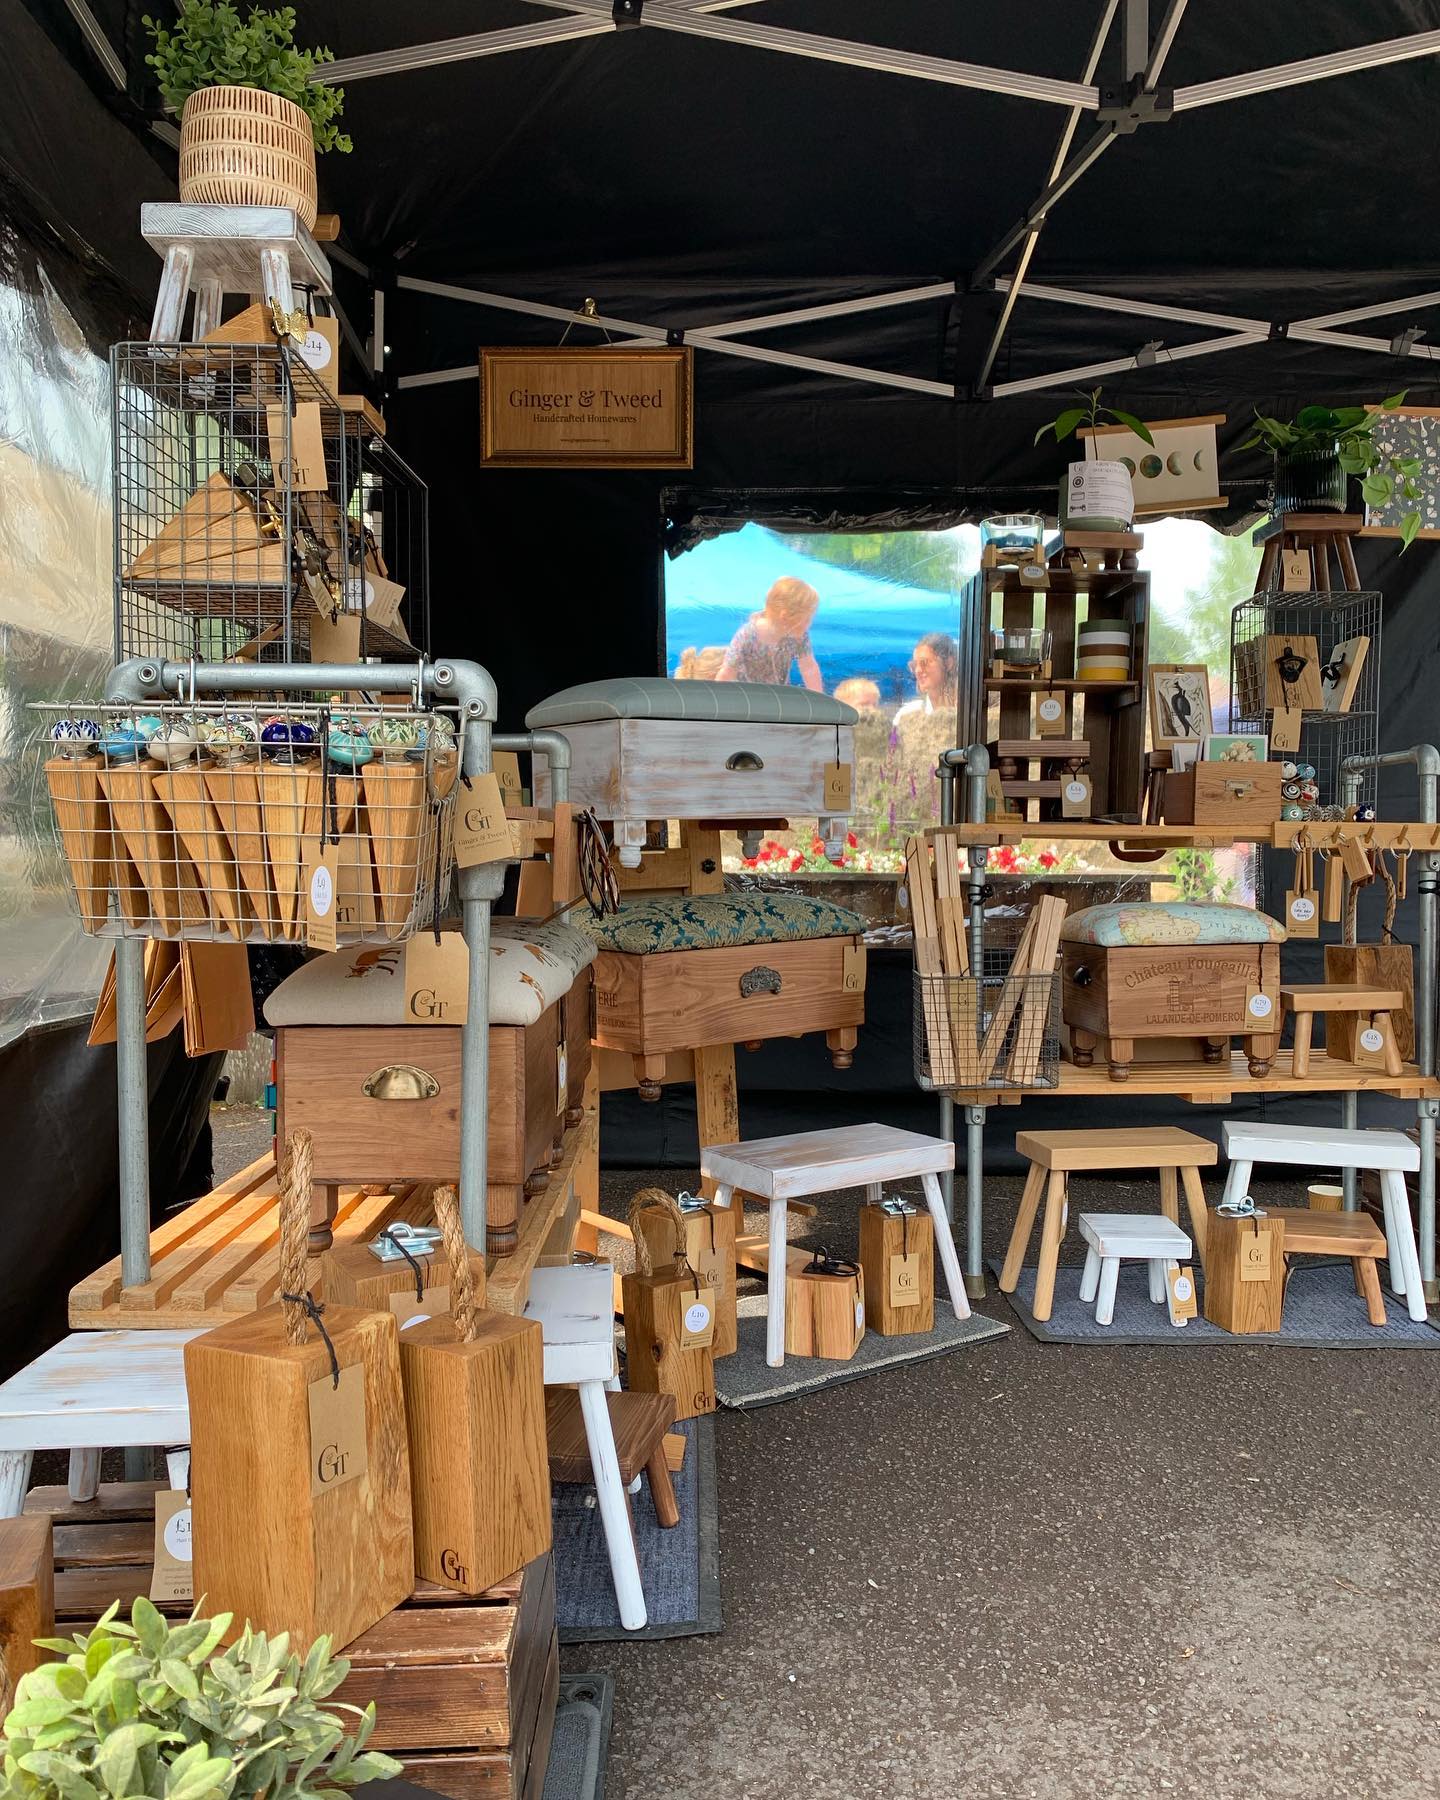 At the Frome Weekly Market today until 3pm! The sun is shining and there are lots of stalls to browseClothing, homewares, food, antiques, jewellery and a fab coffee truck@fromeweeklymarket